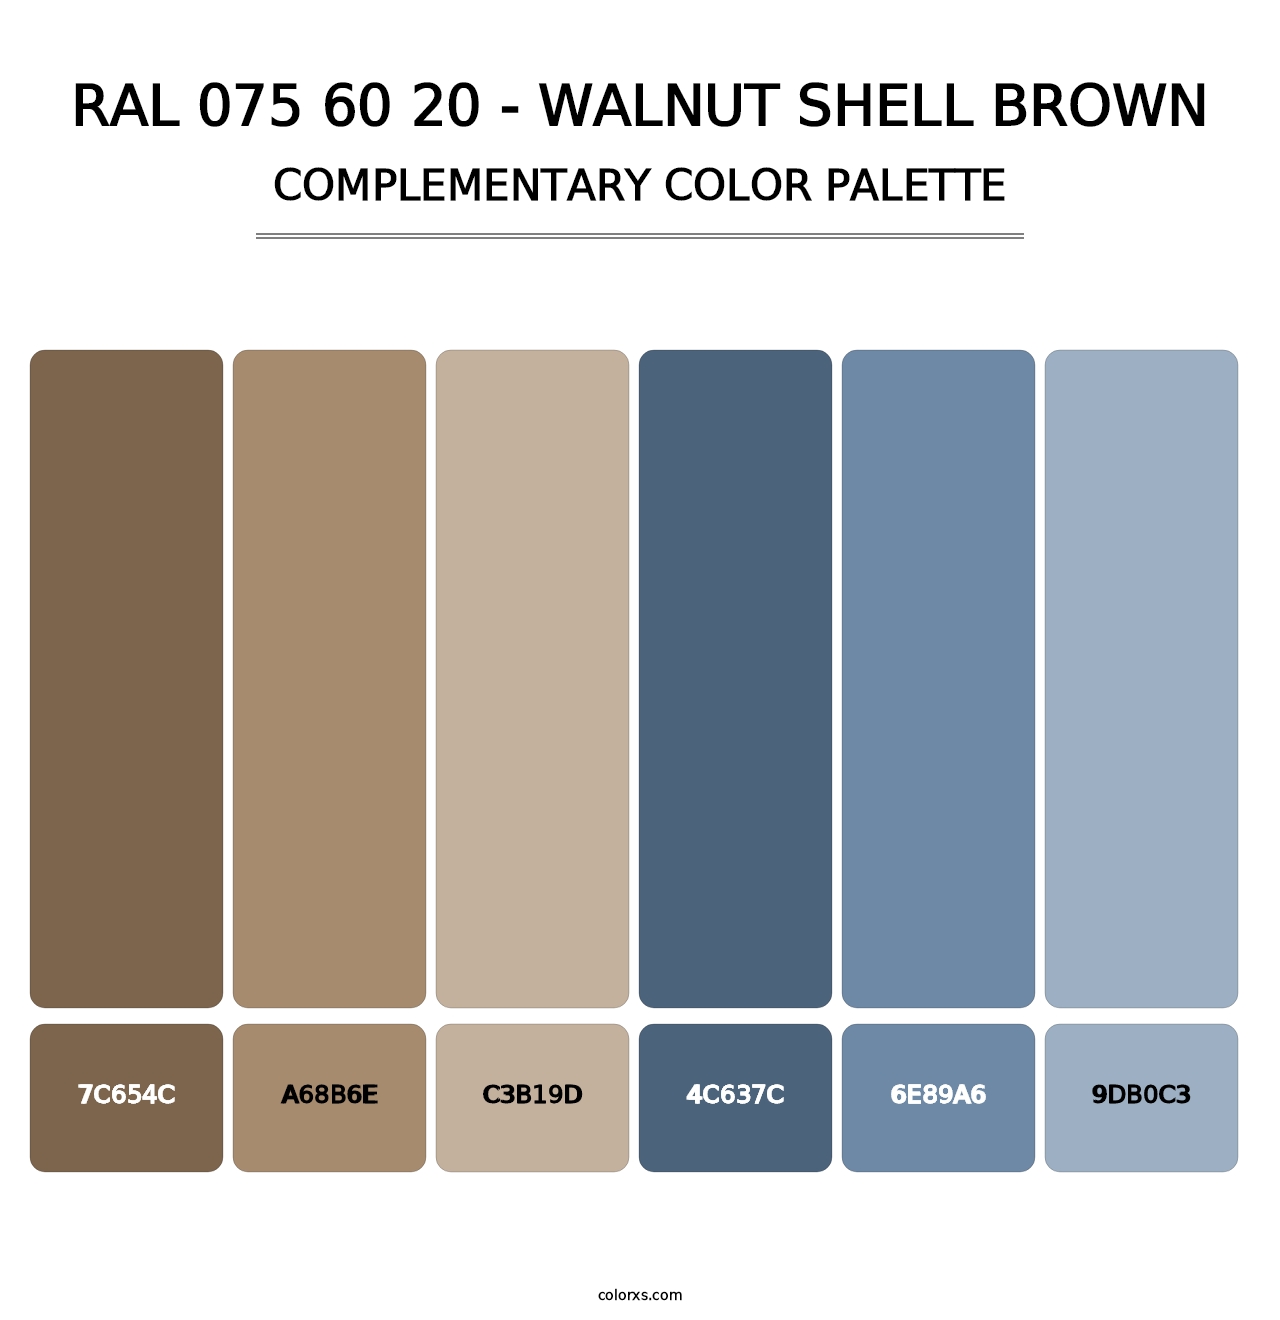 RAL 075 60 20 - Walnut Shell Brown - Complementary Color Palette